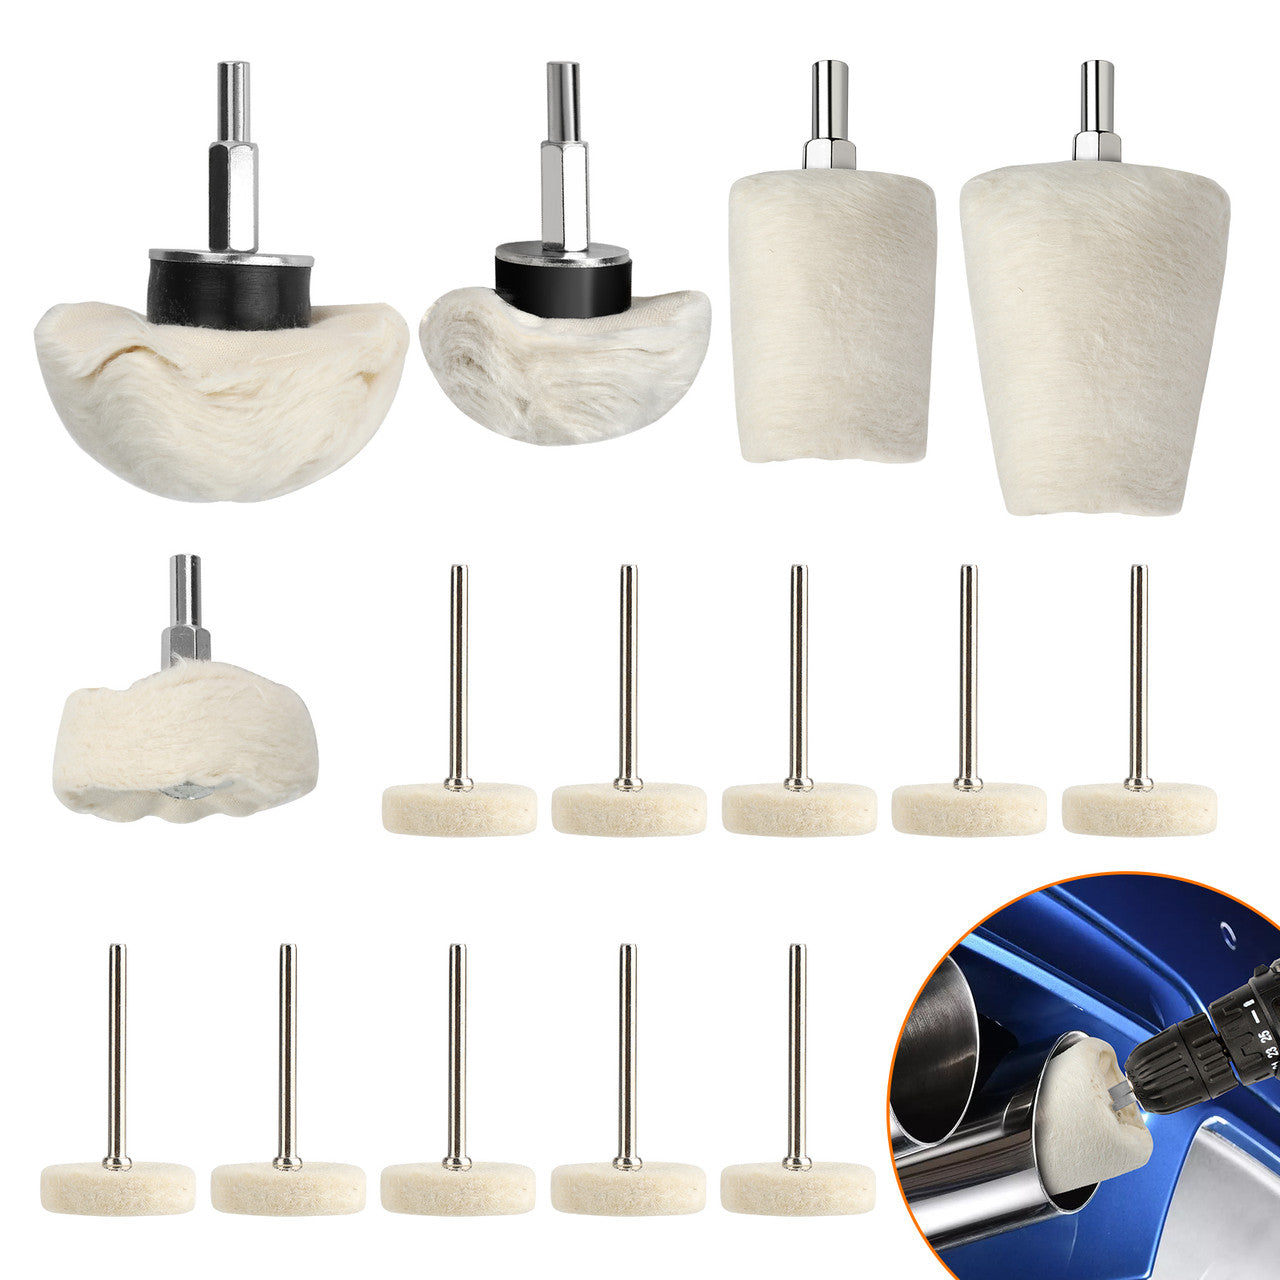 Polishing Buffing Pads Mop Wheel Buffer Pad Drill Kit for Cleaning the House or Car, 15Pcs